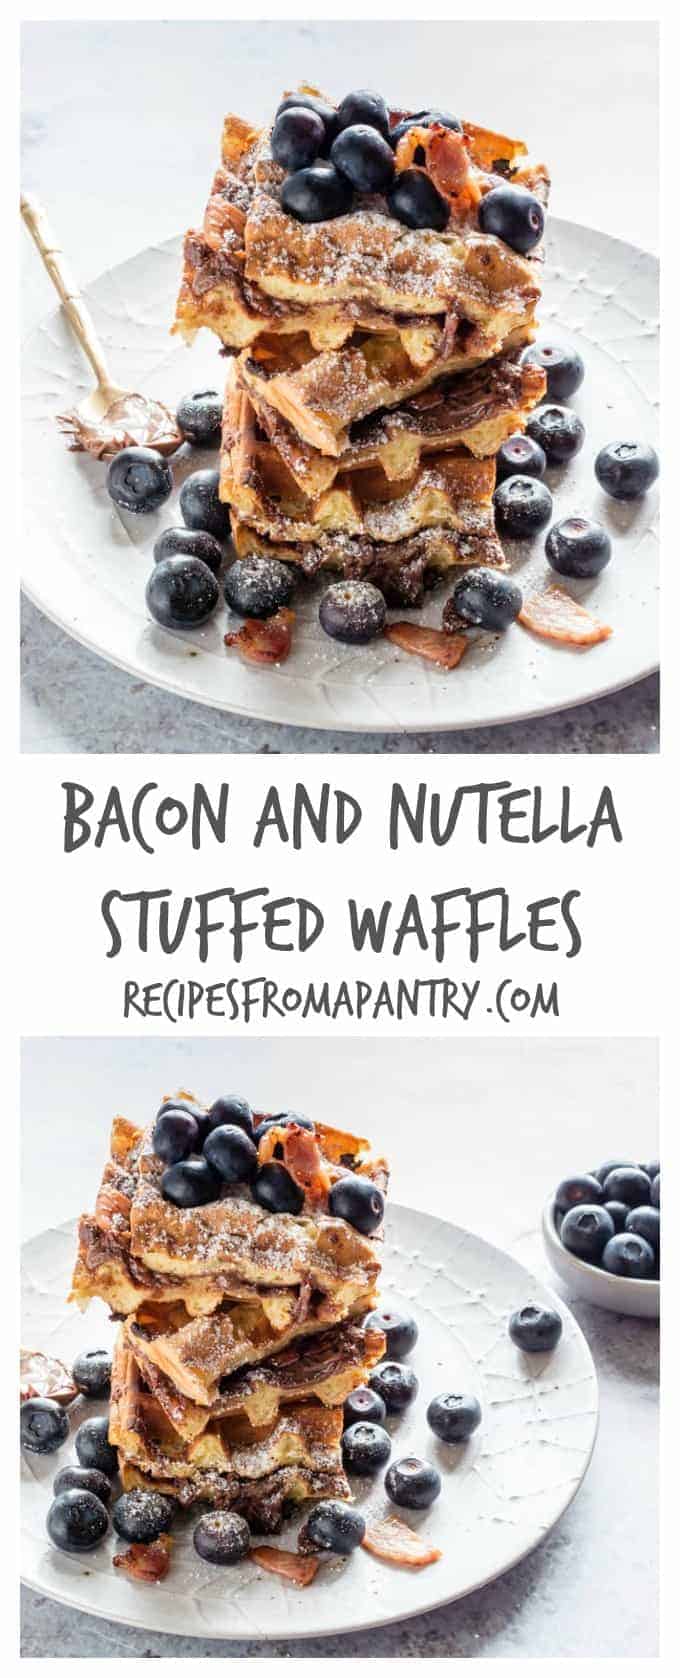 Decadent Bacon Nutella Waffles - Recipes From A Pantry